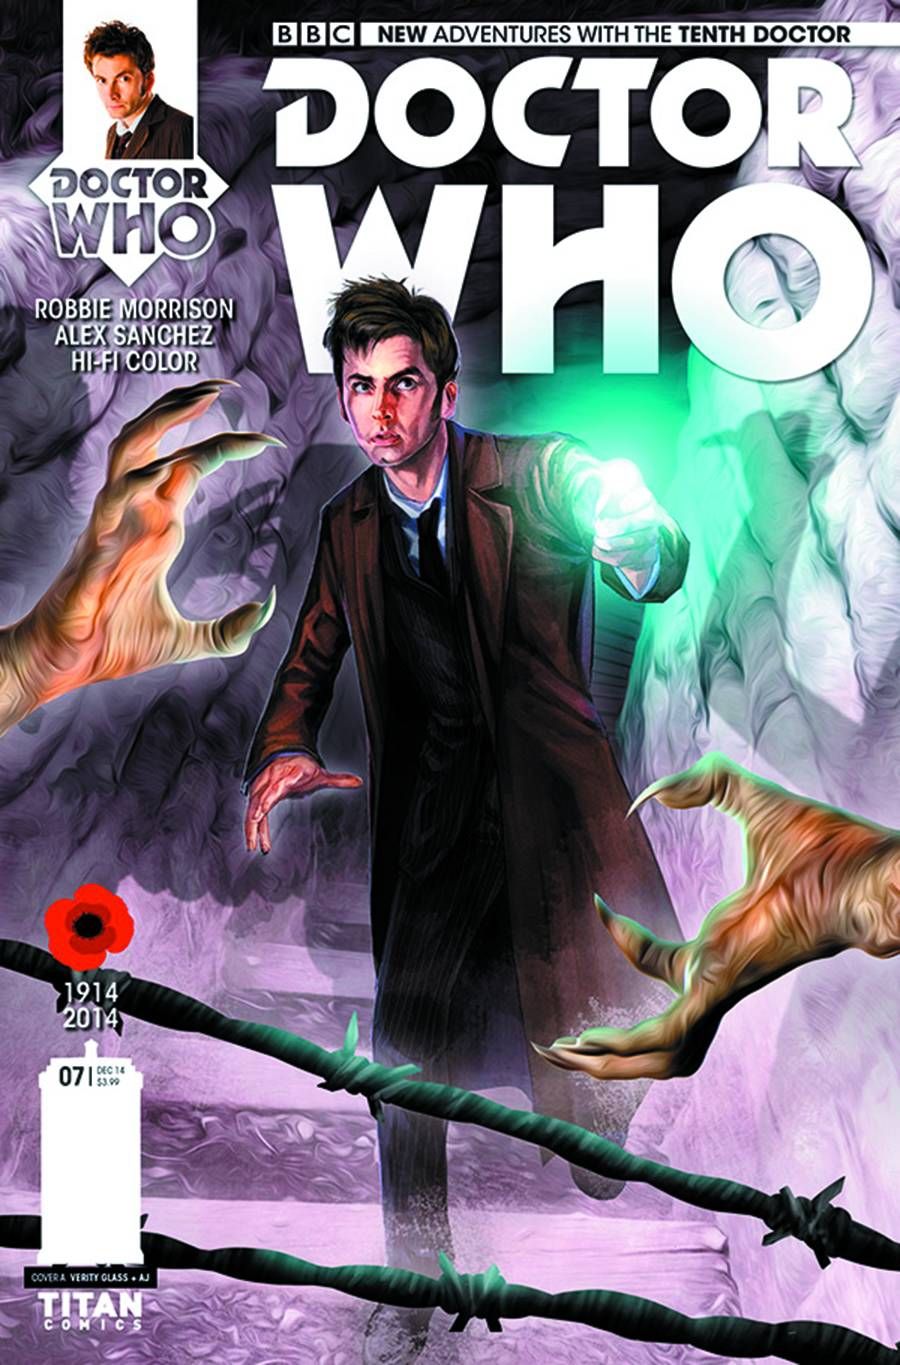 Doctor Who: The Tenth Doctor #7 Comic